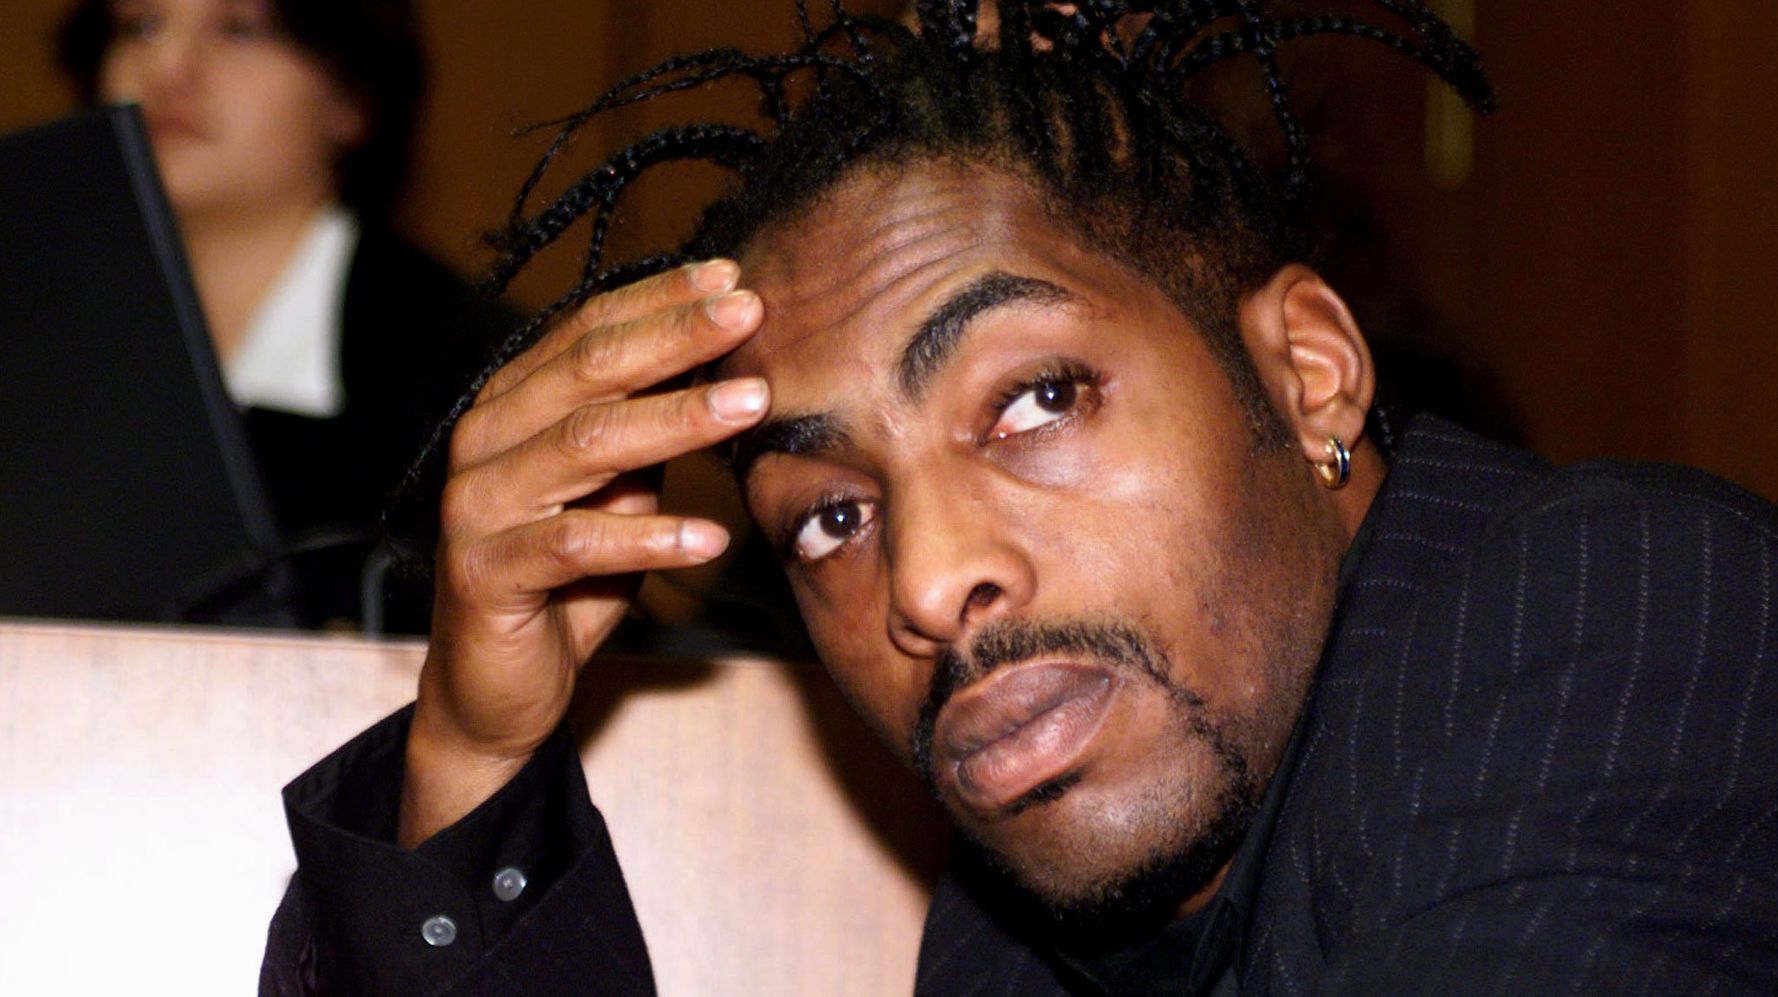 Outdated '90s terms - coolio